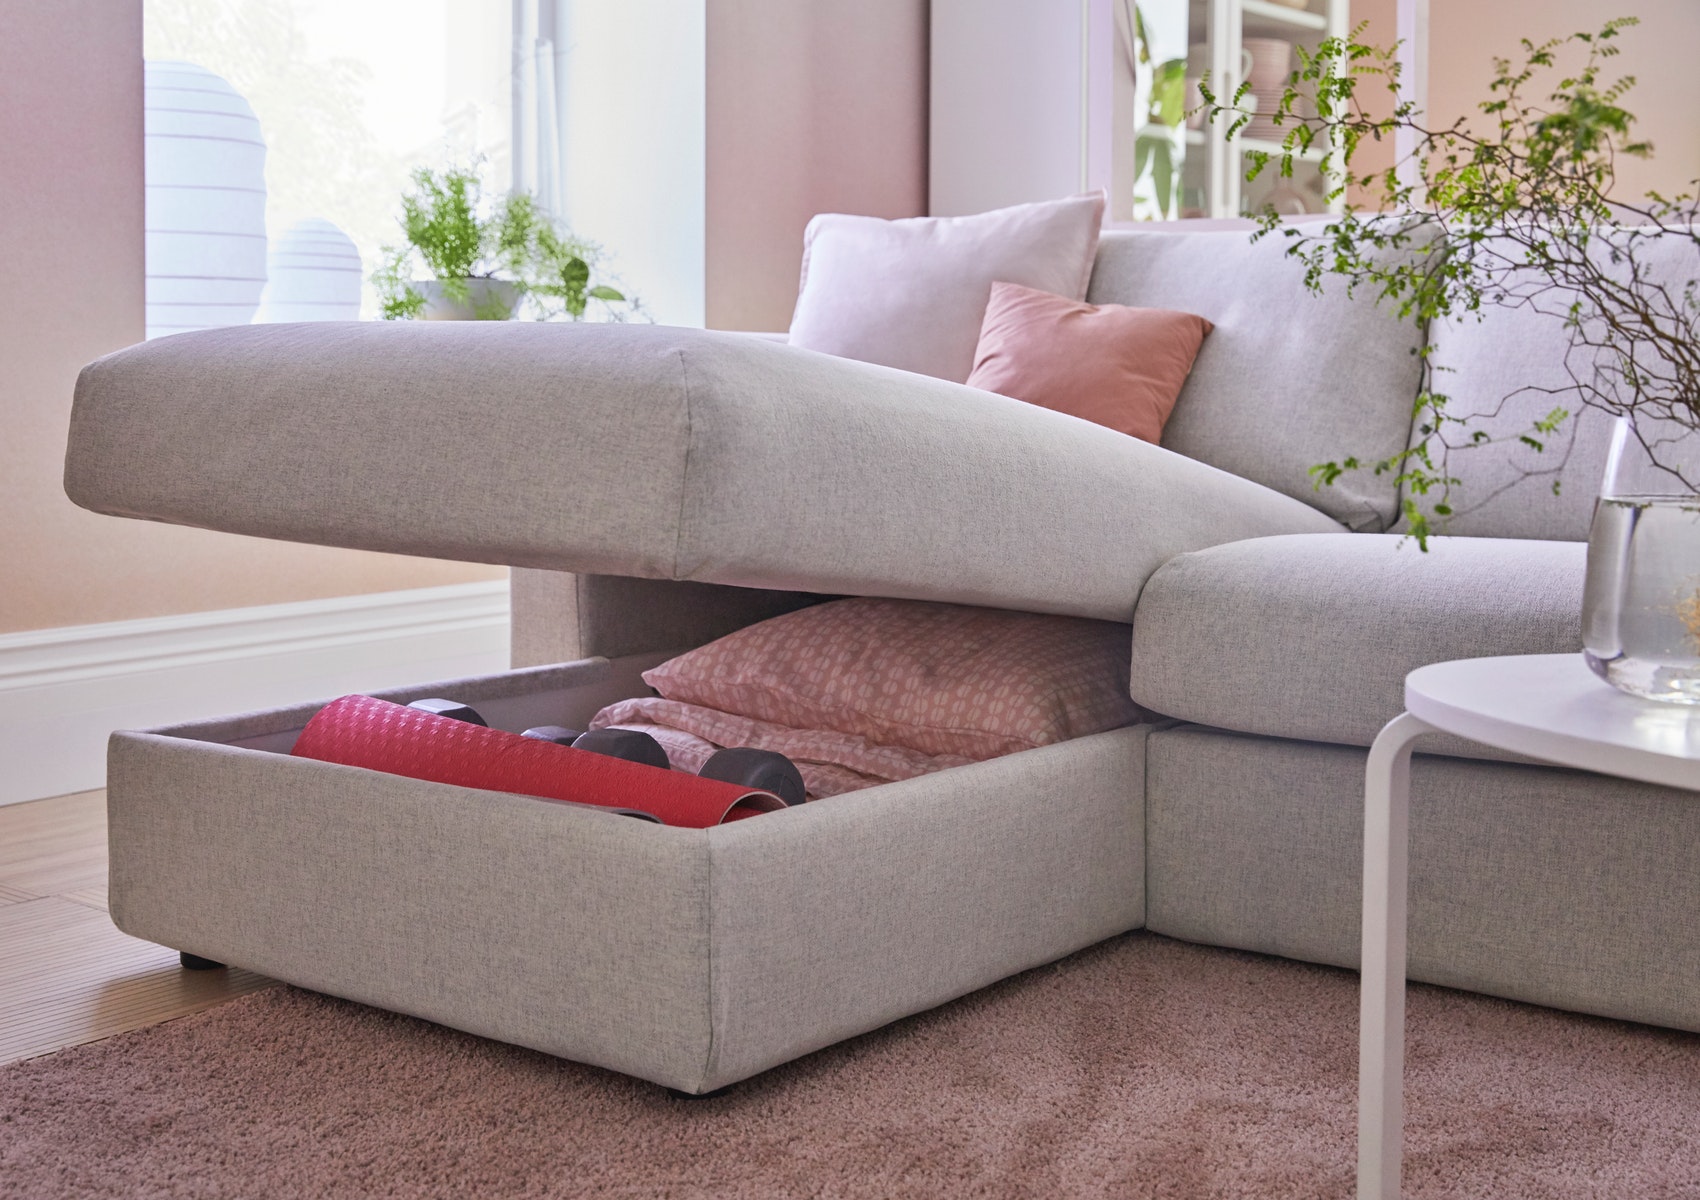 Best Ikea Couch For Living Room